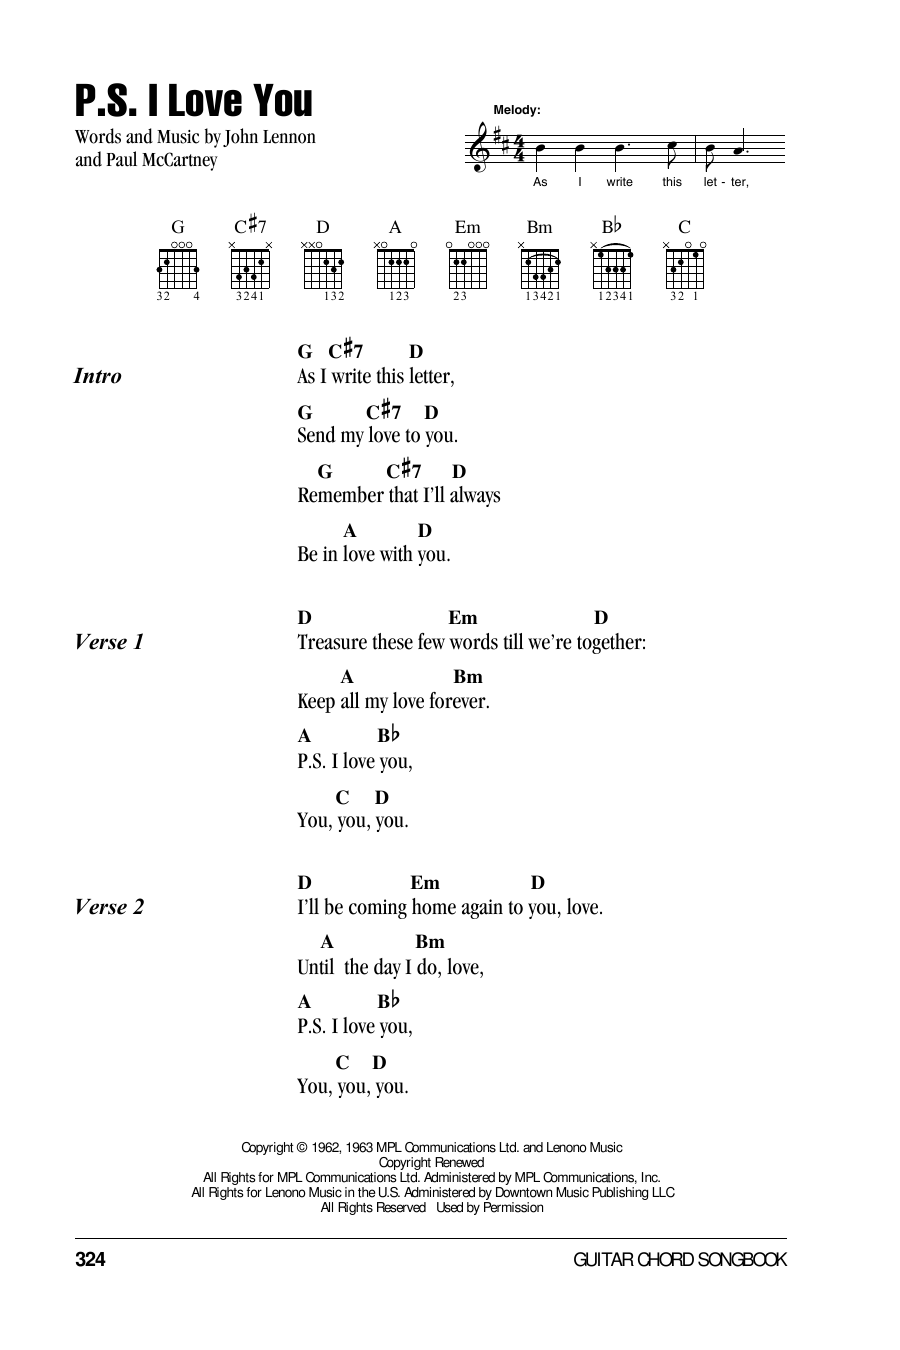 Download The Beatles P.S. I Love You Sheet Music